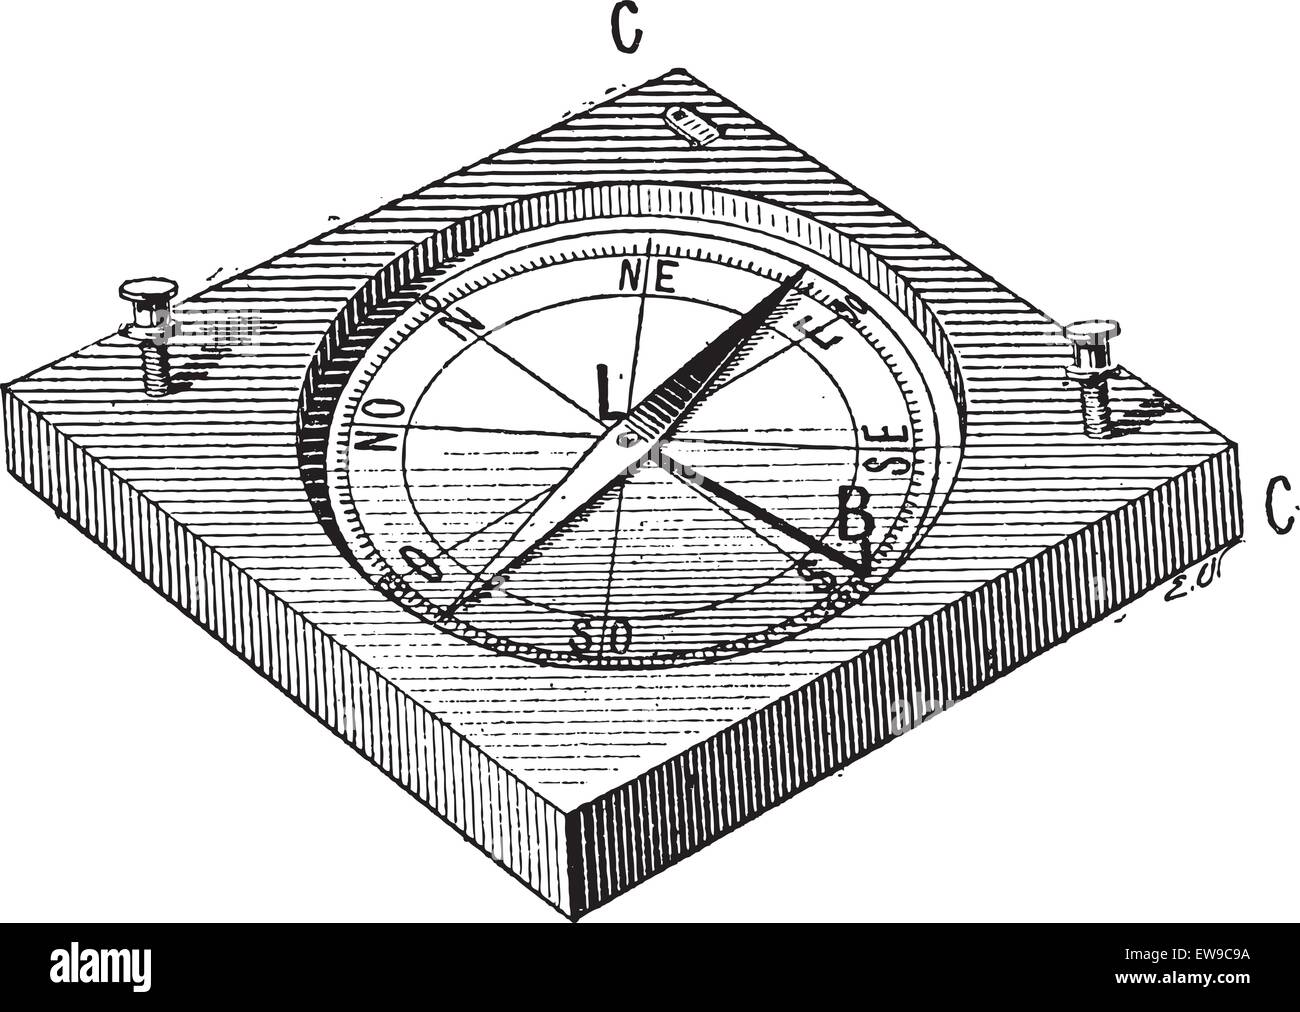 Circumferentor or Surveyor's Compass, vintage engraved illustration. Dictionary of Words and Things - Larive and Fleury - 1895 Stock Vector